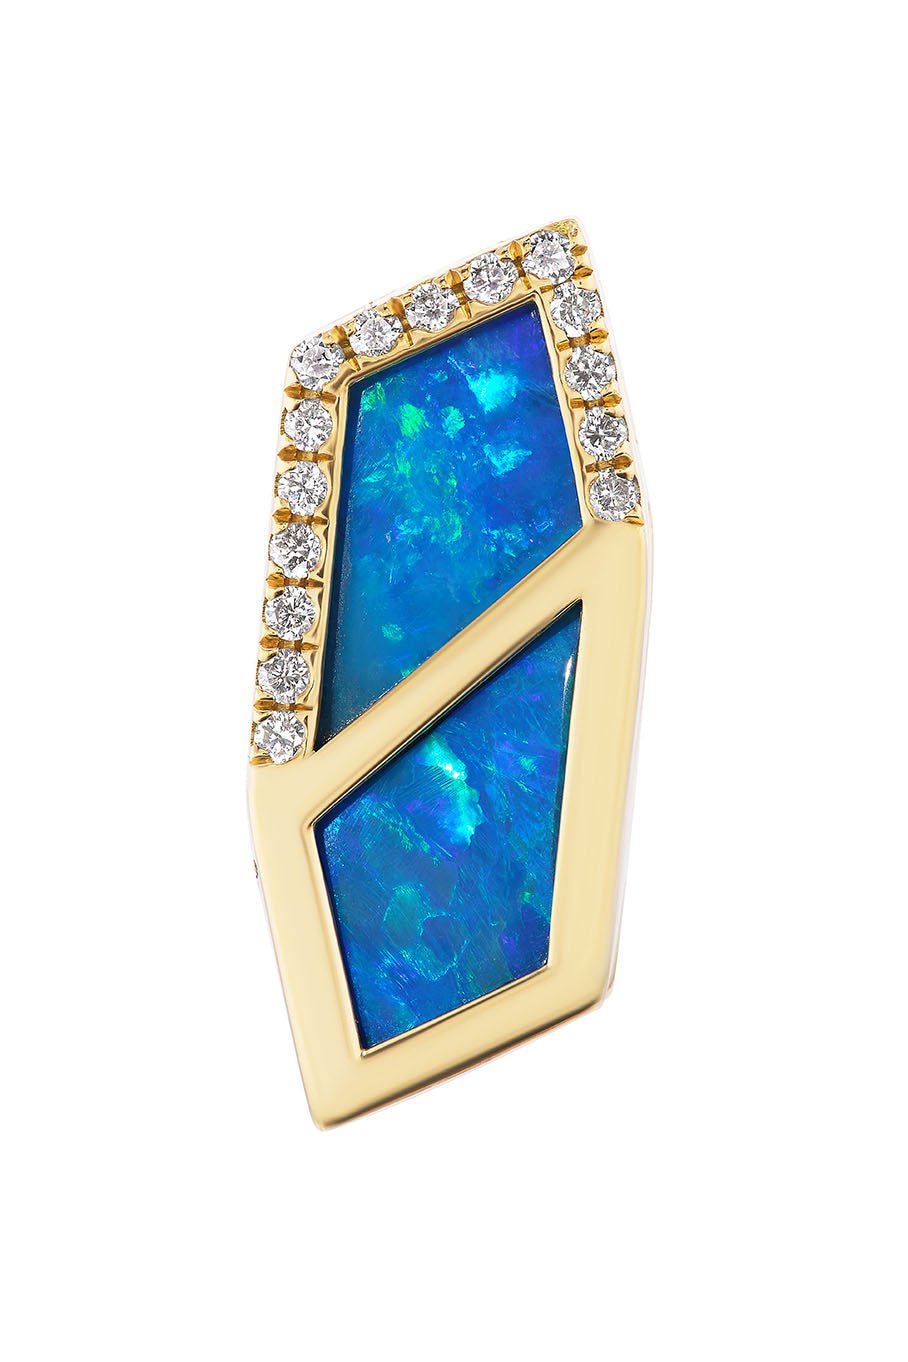 UNIFORM OBJECT-Turquoise Opal Diamond Connector-YELLOW GOLD